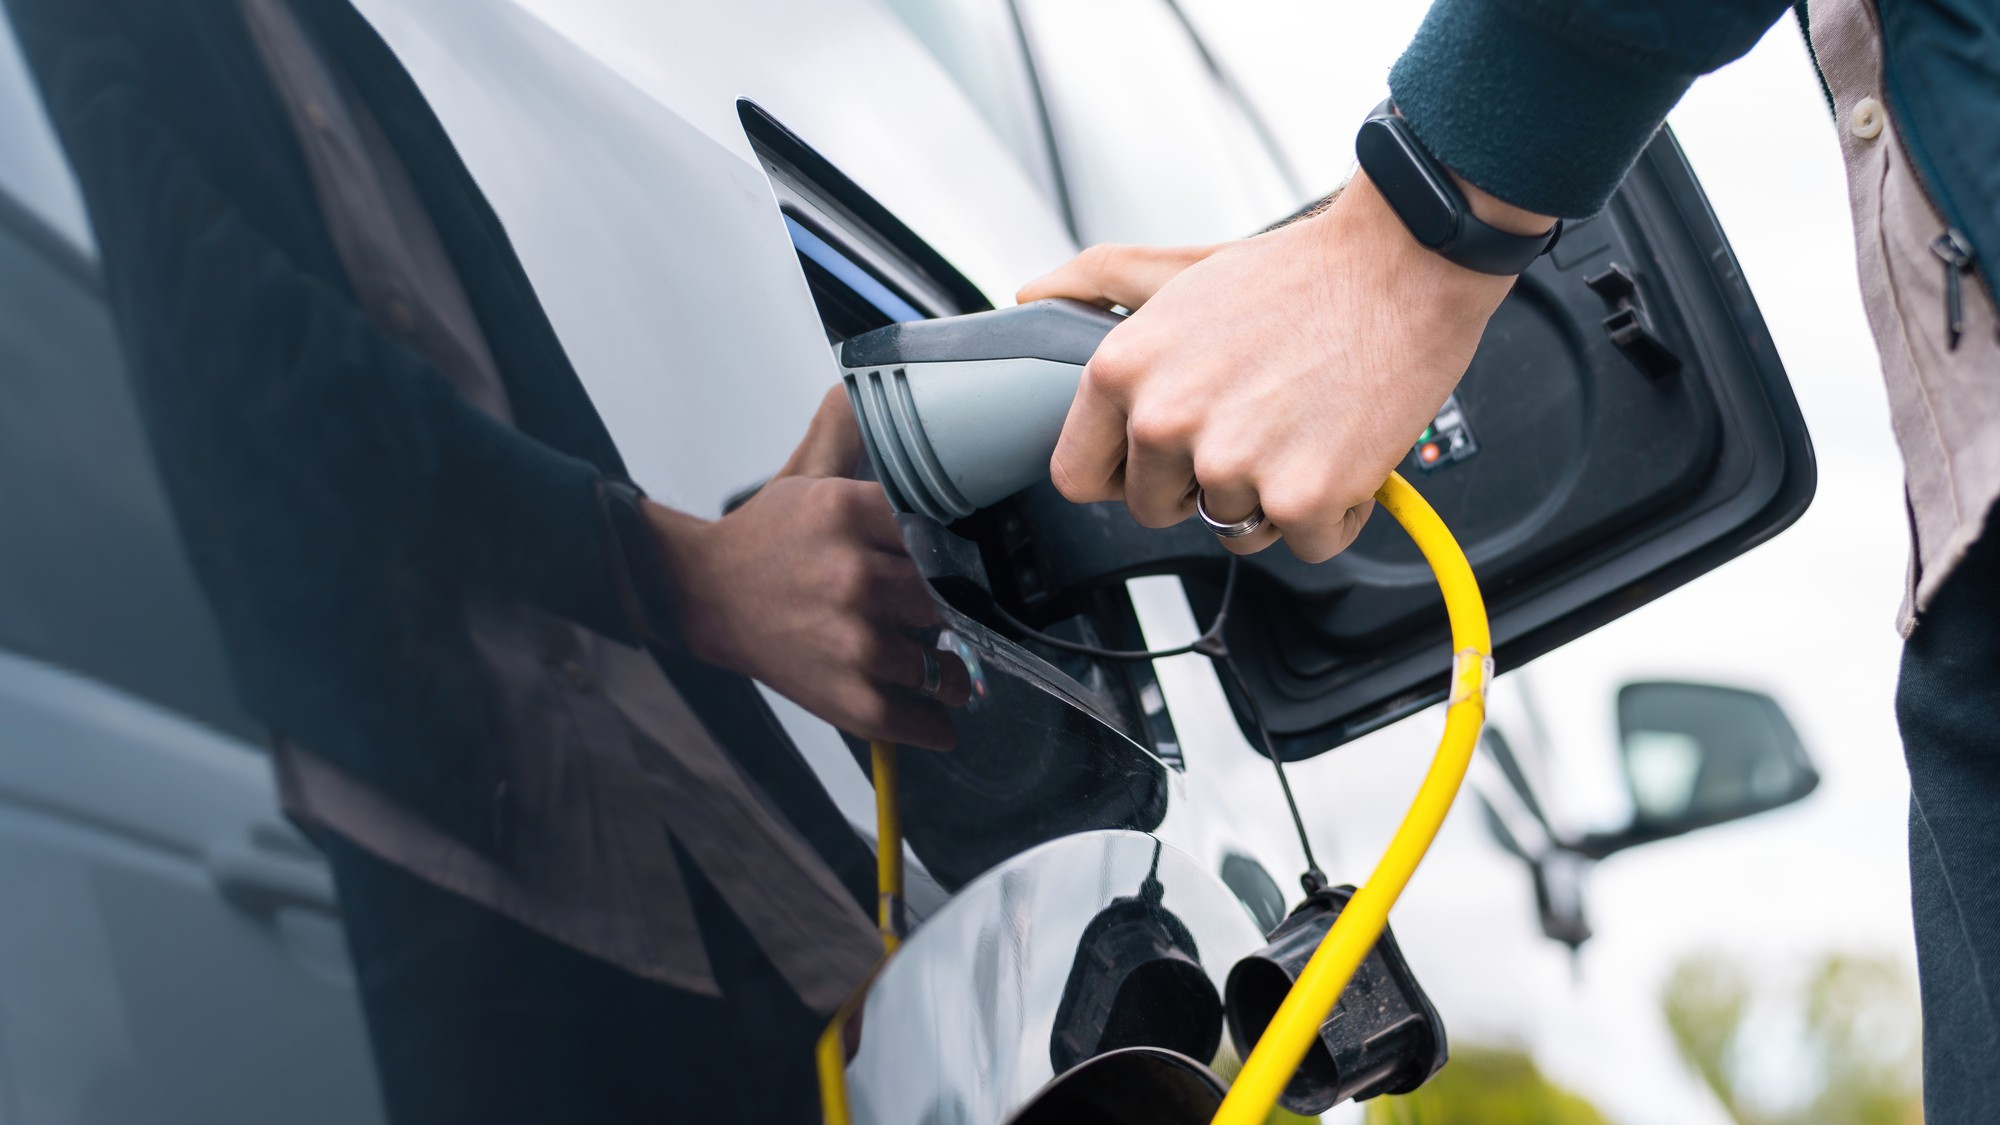 The Ultimate Guide To Installing An Ev Charger